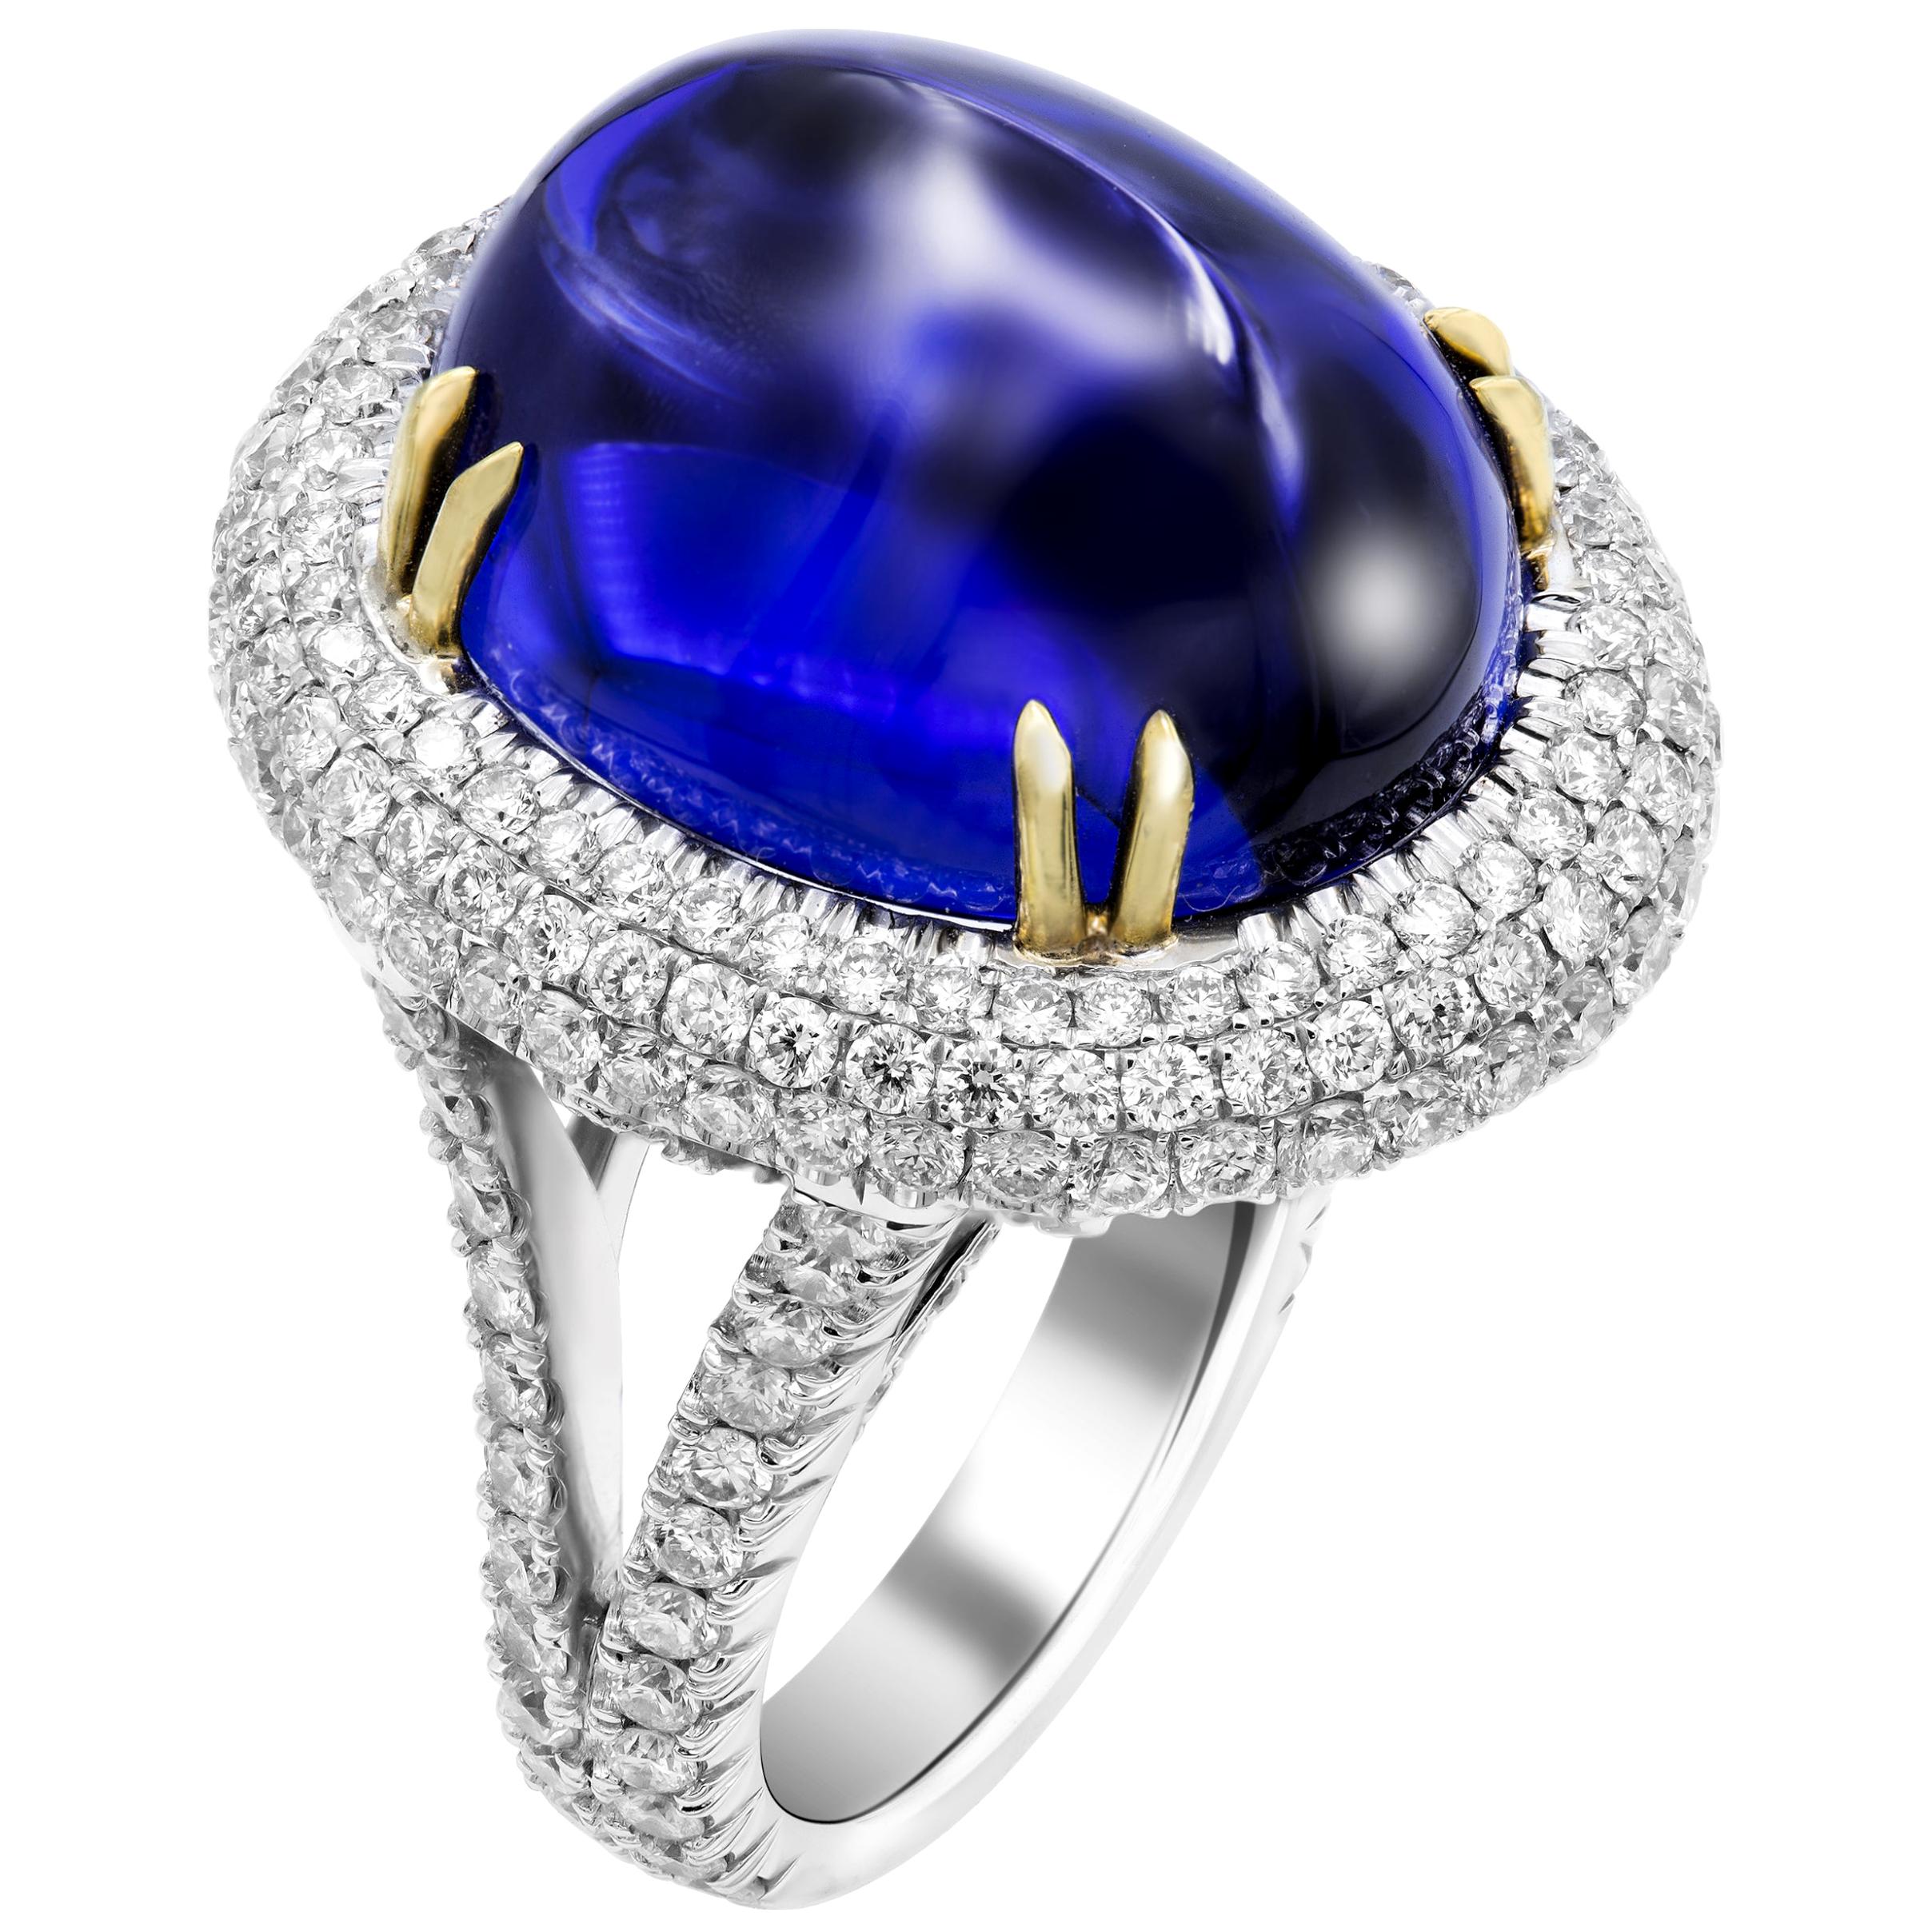 GIA Certified 26.37 Carat Oval Tanzanite Cabochon Diamond Cocktail Ring